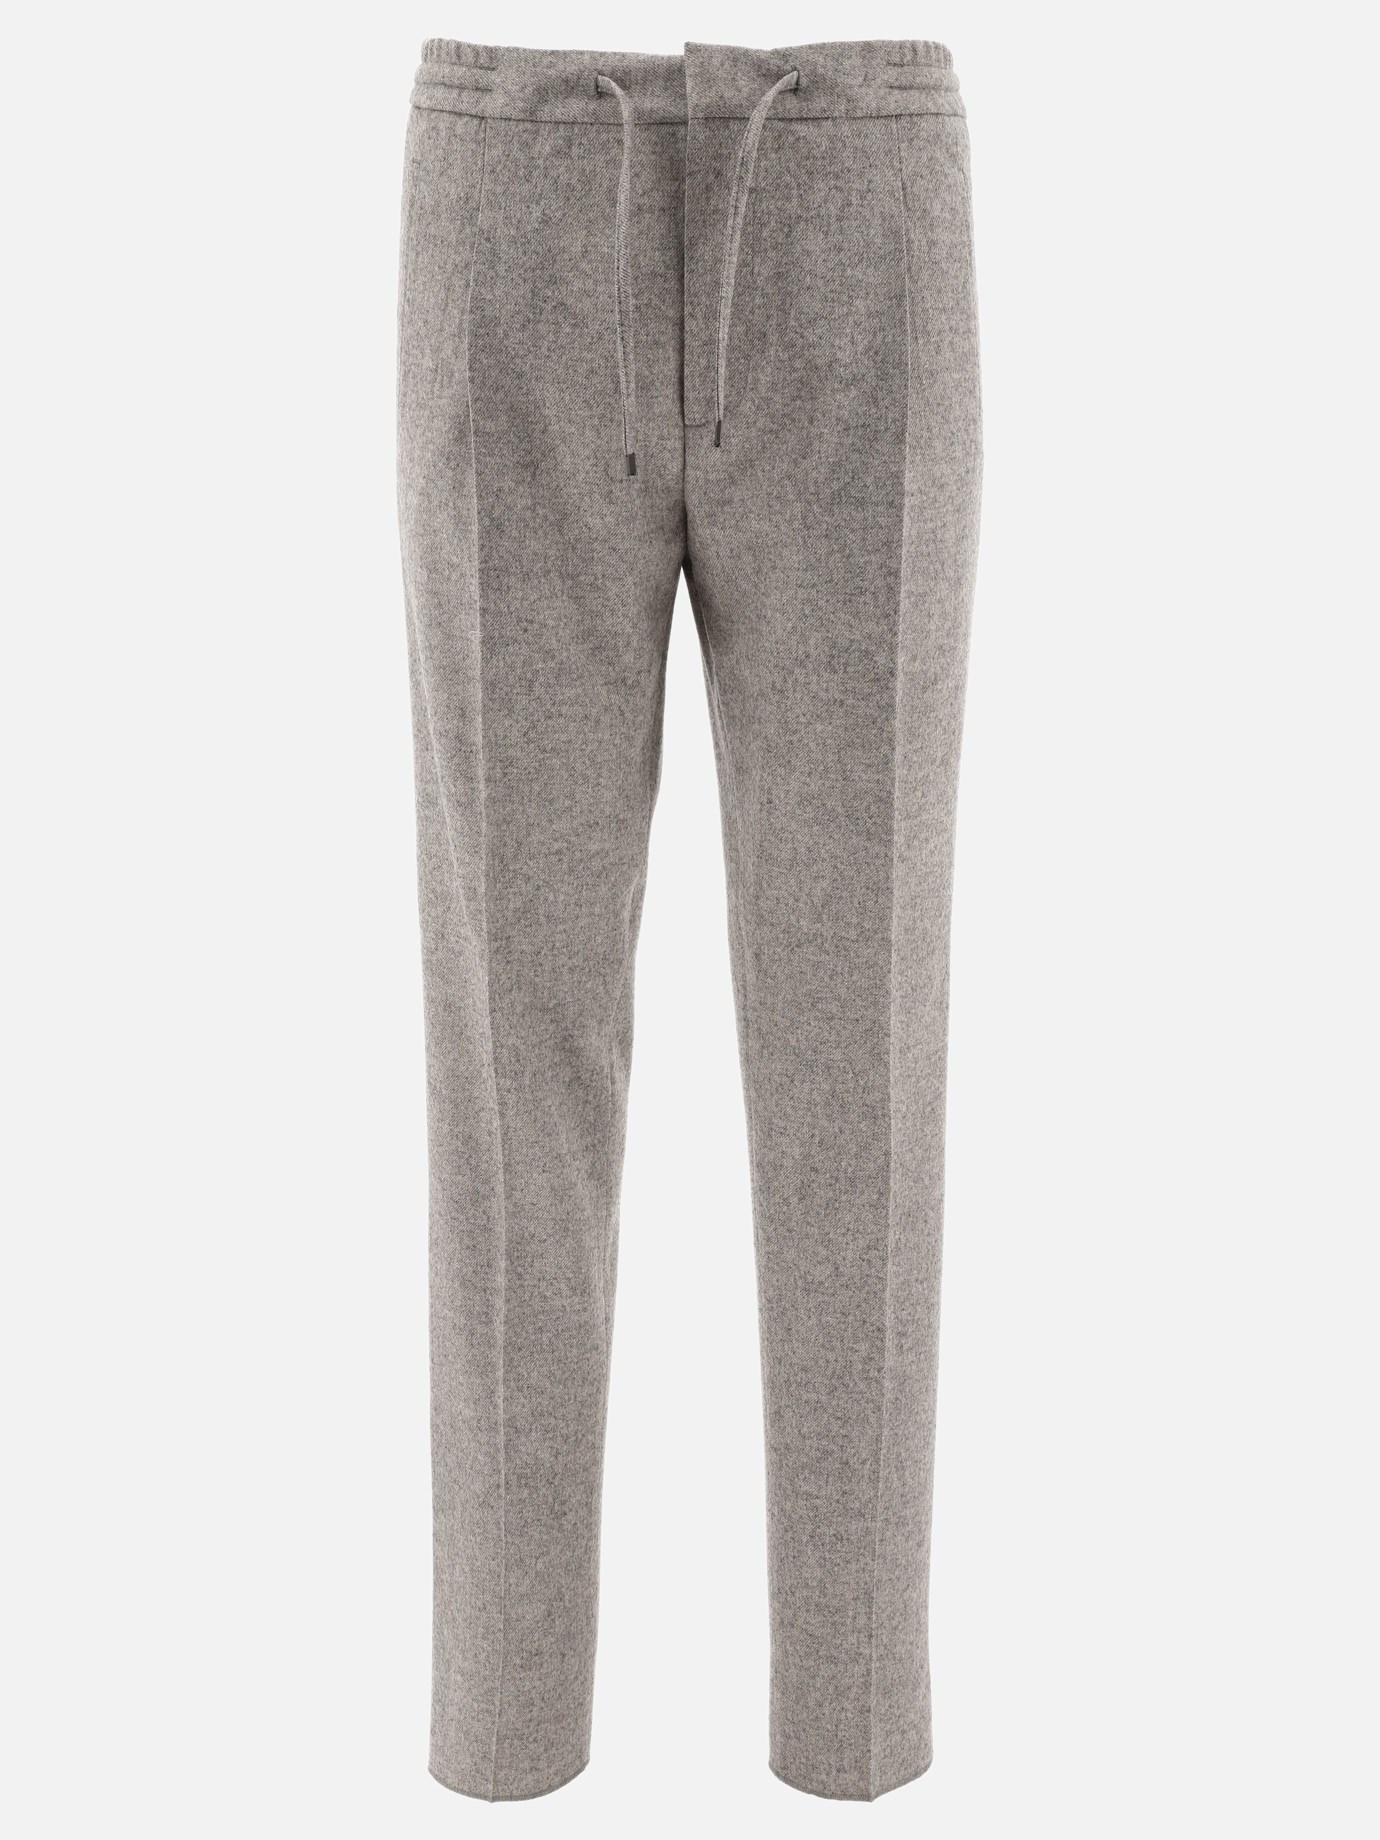 Wool trousers with drawstrings